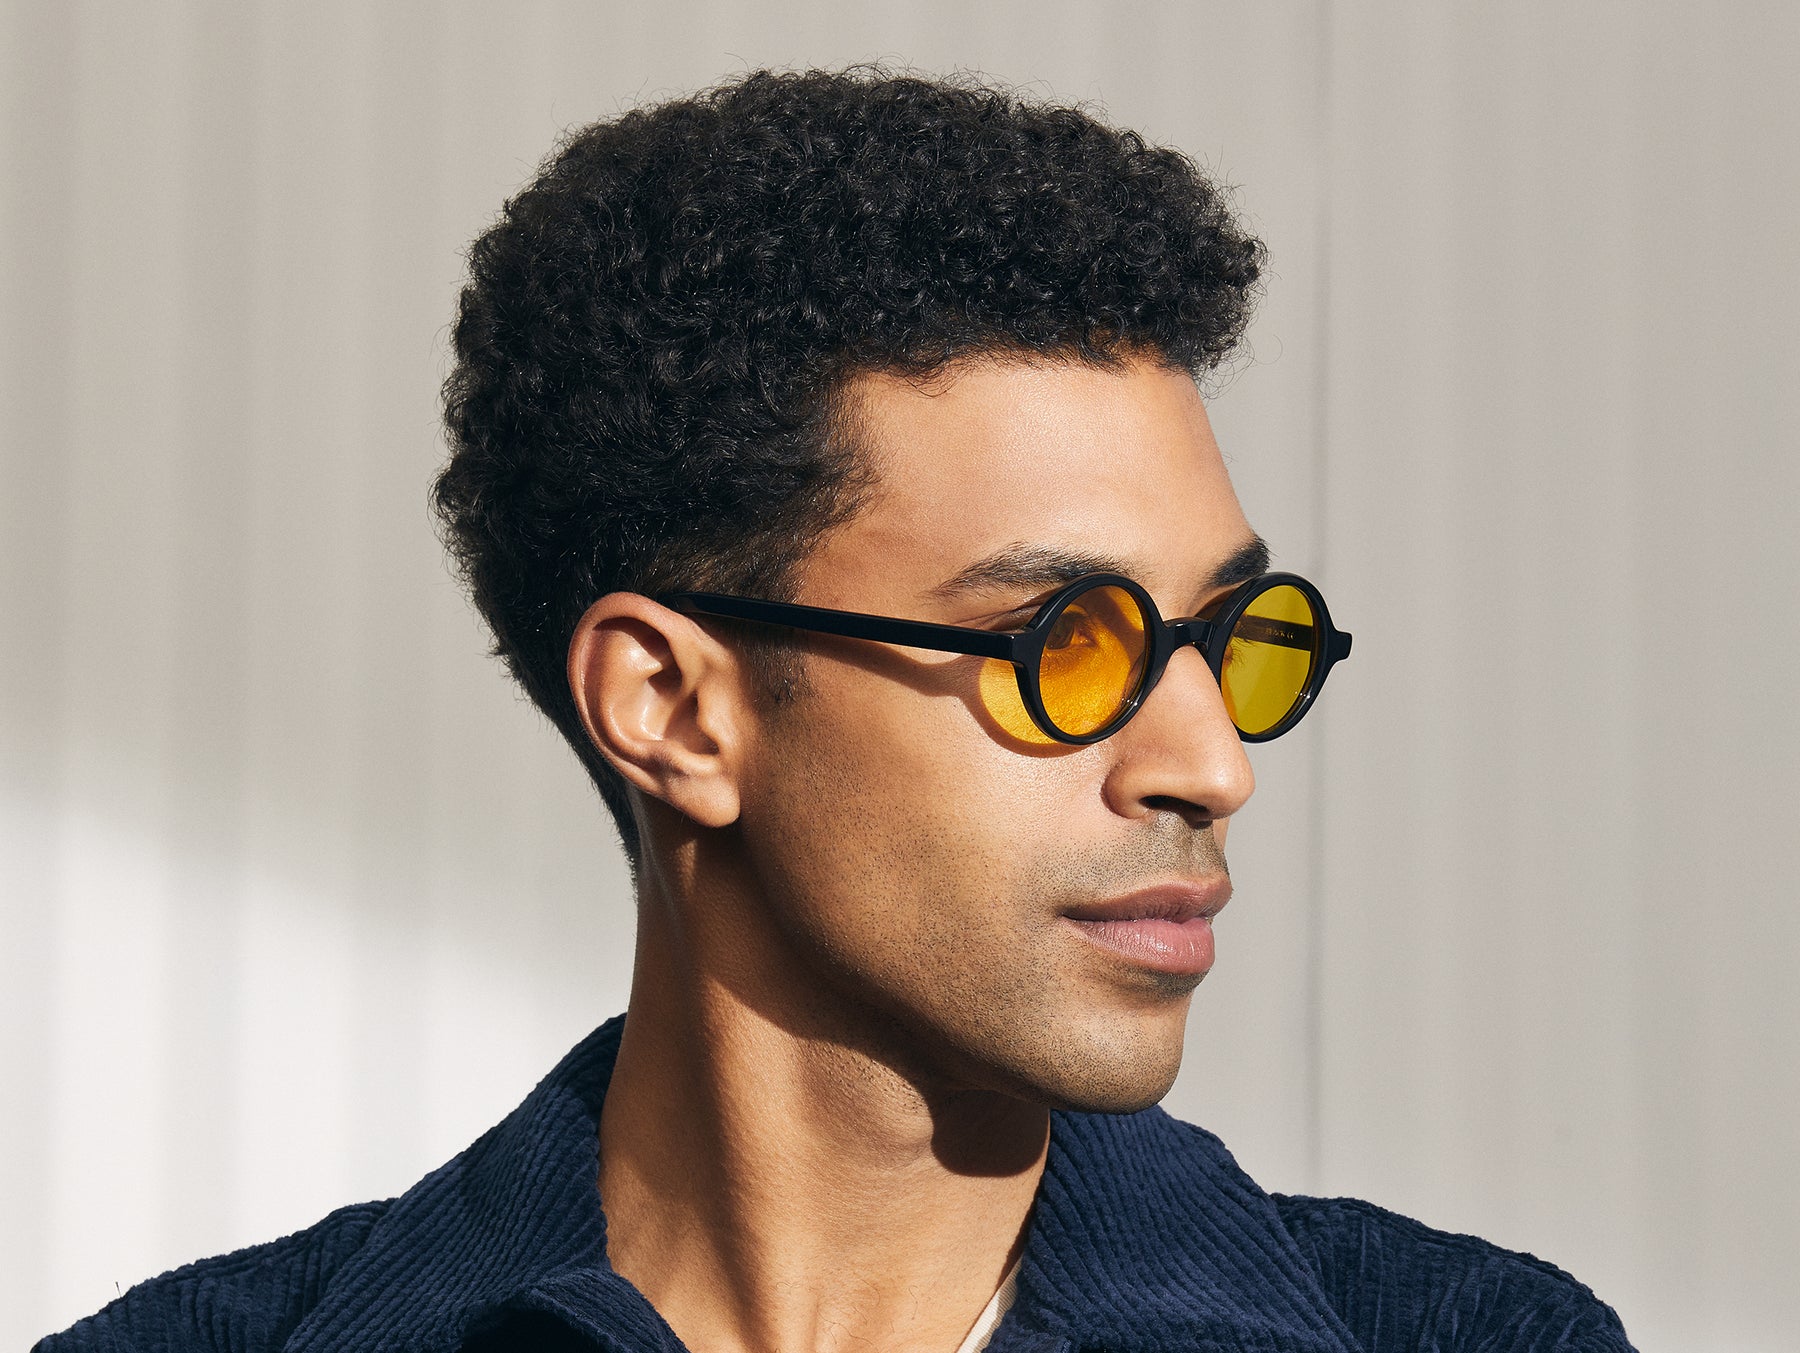 Model is wearing The ZOLMAN in Black in size 42 with Mellow Yellow Tinted Lenses